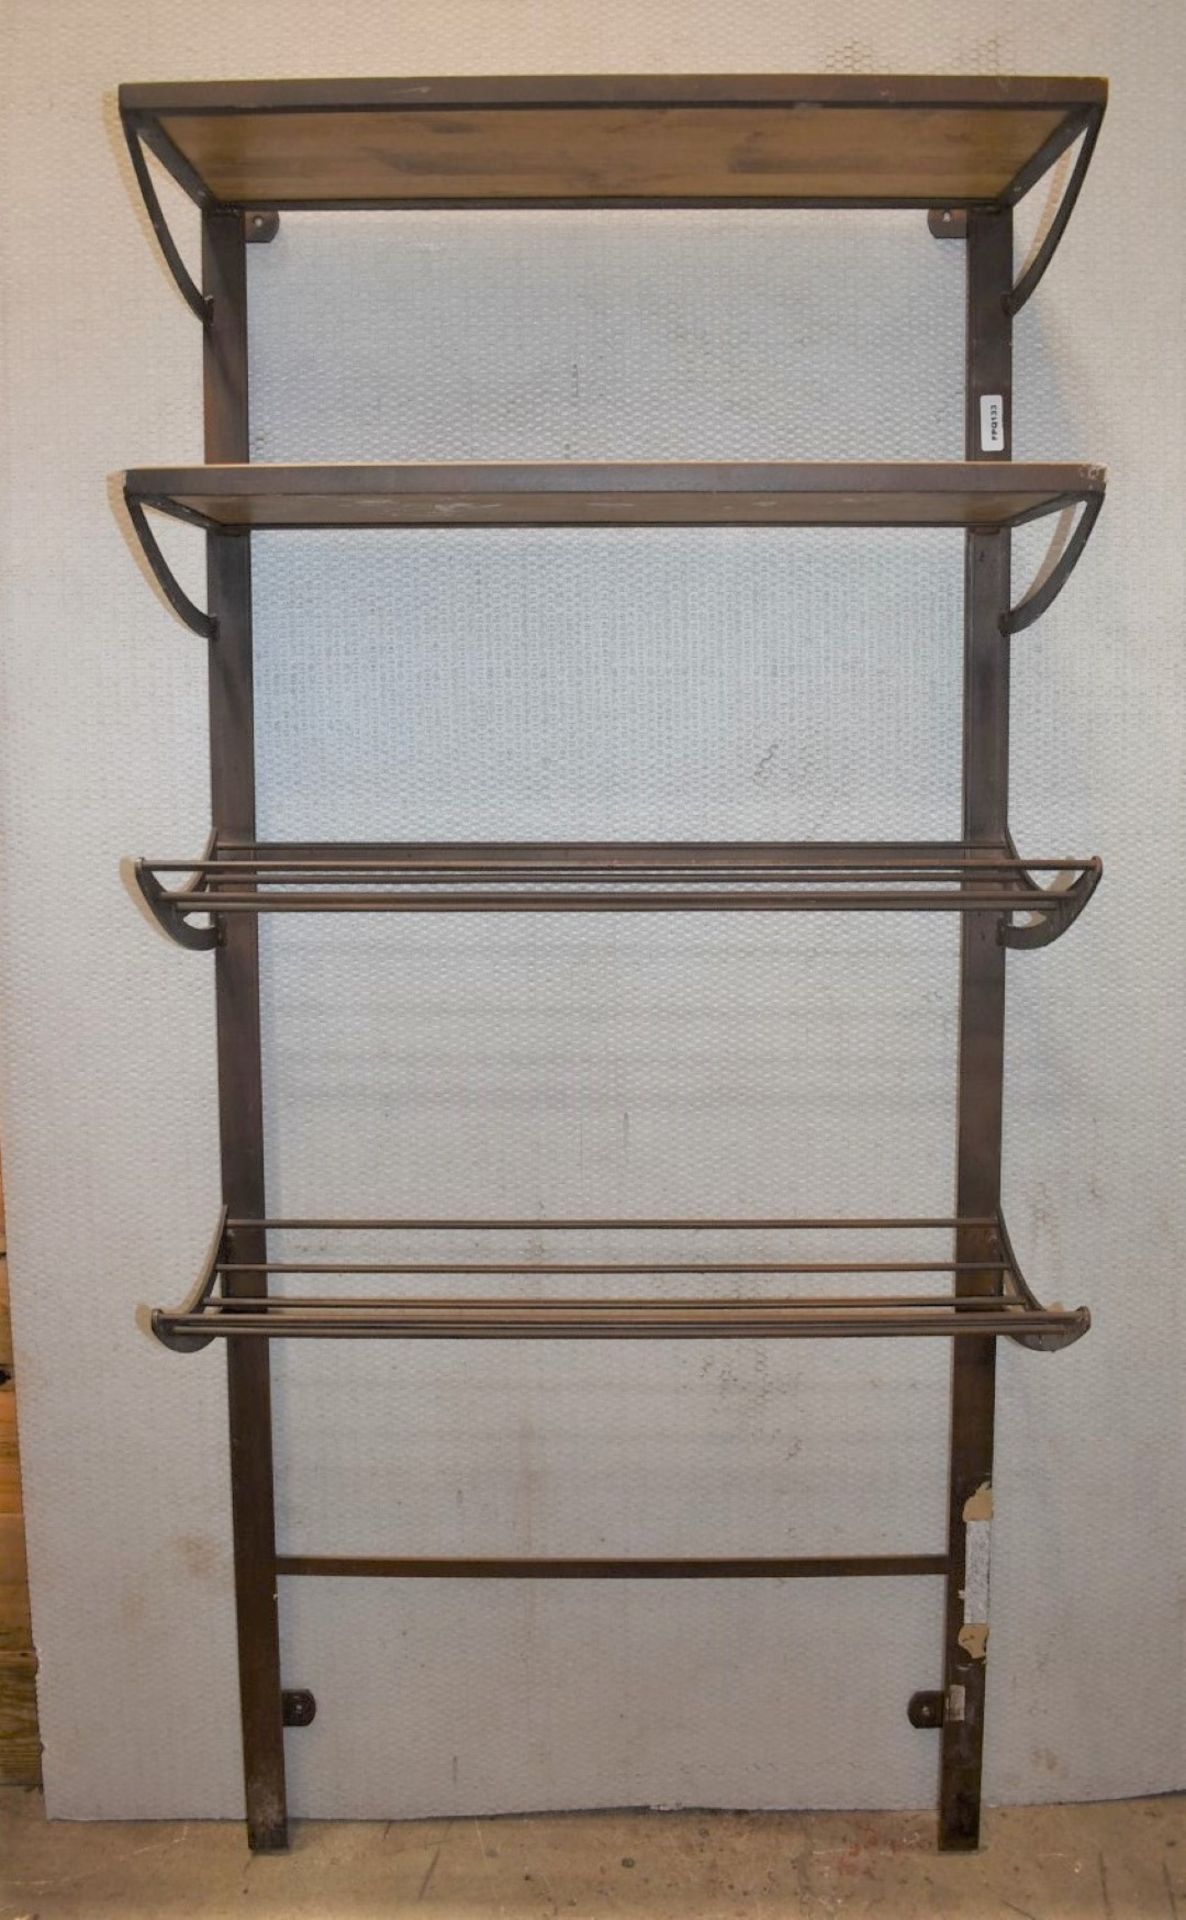 5 x Rustic Bakery Wall Shelf Units With a Rustic Traditional Finish - Over 14ft in Length! - Image 23 of 25